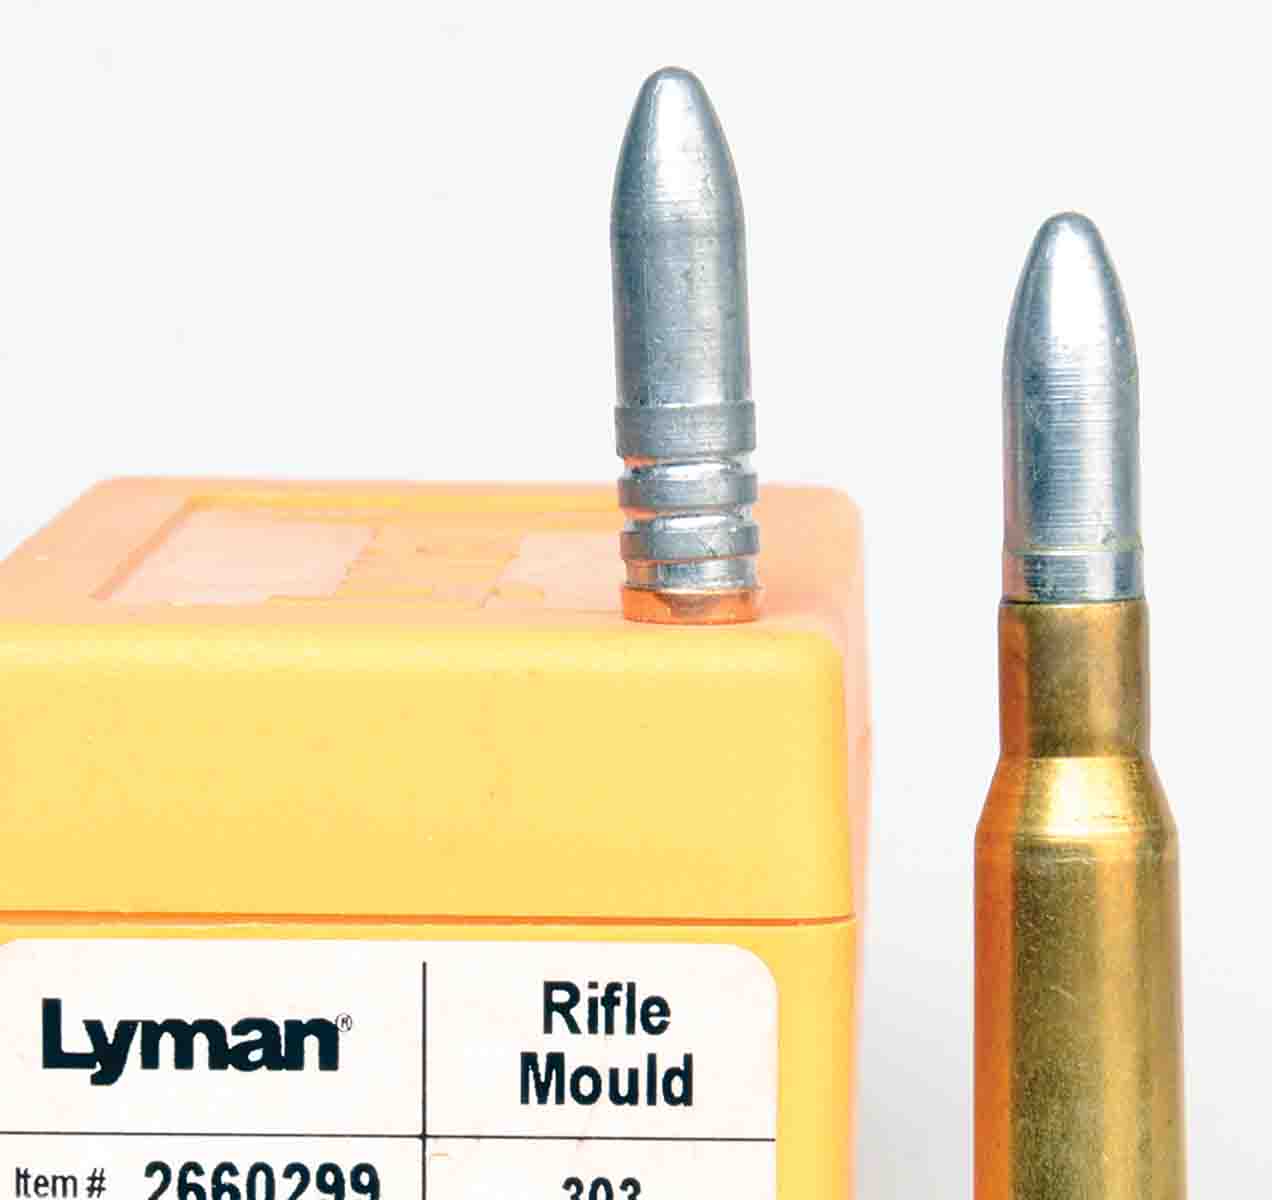 Mike considers gas checks necessary for cast bullet shooting with bottlenecked, smokeless-powder rifle cartridges, such as the 7.62x54R, but they must be applied properly. The bullet on the mould box is leaning because its gas check is not seated properly.